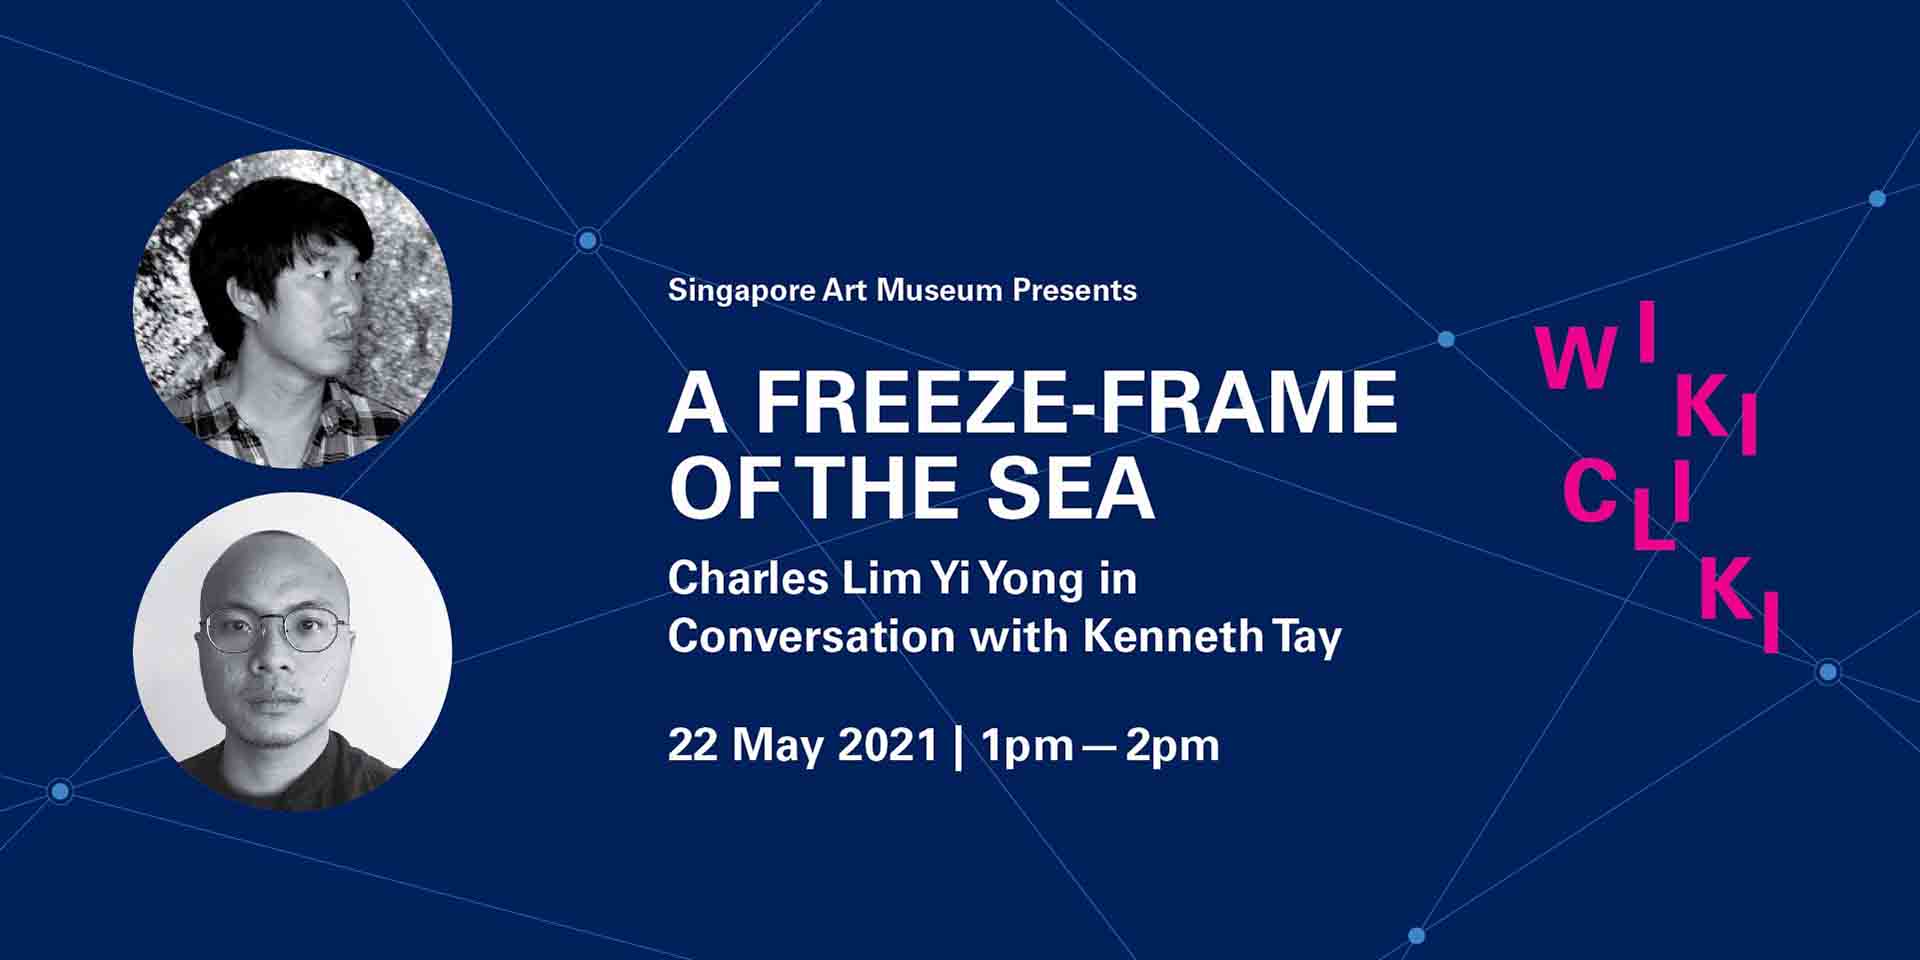 A Freeze-Frame of the Sea: Charles Lim Yi Yong in Conversation with Kenneth Tay